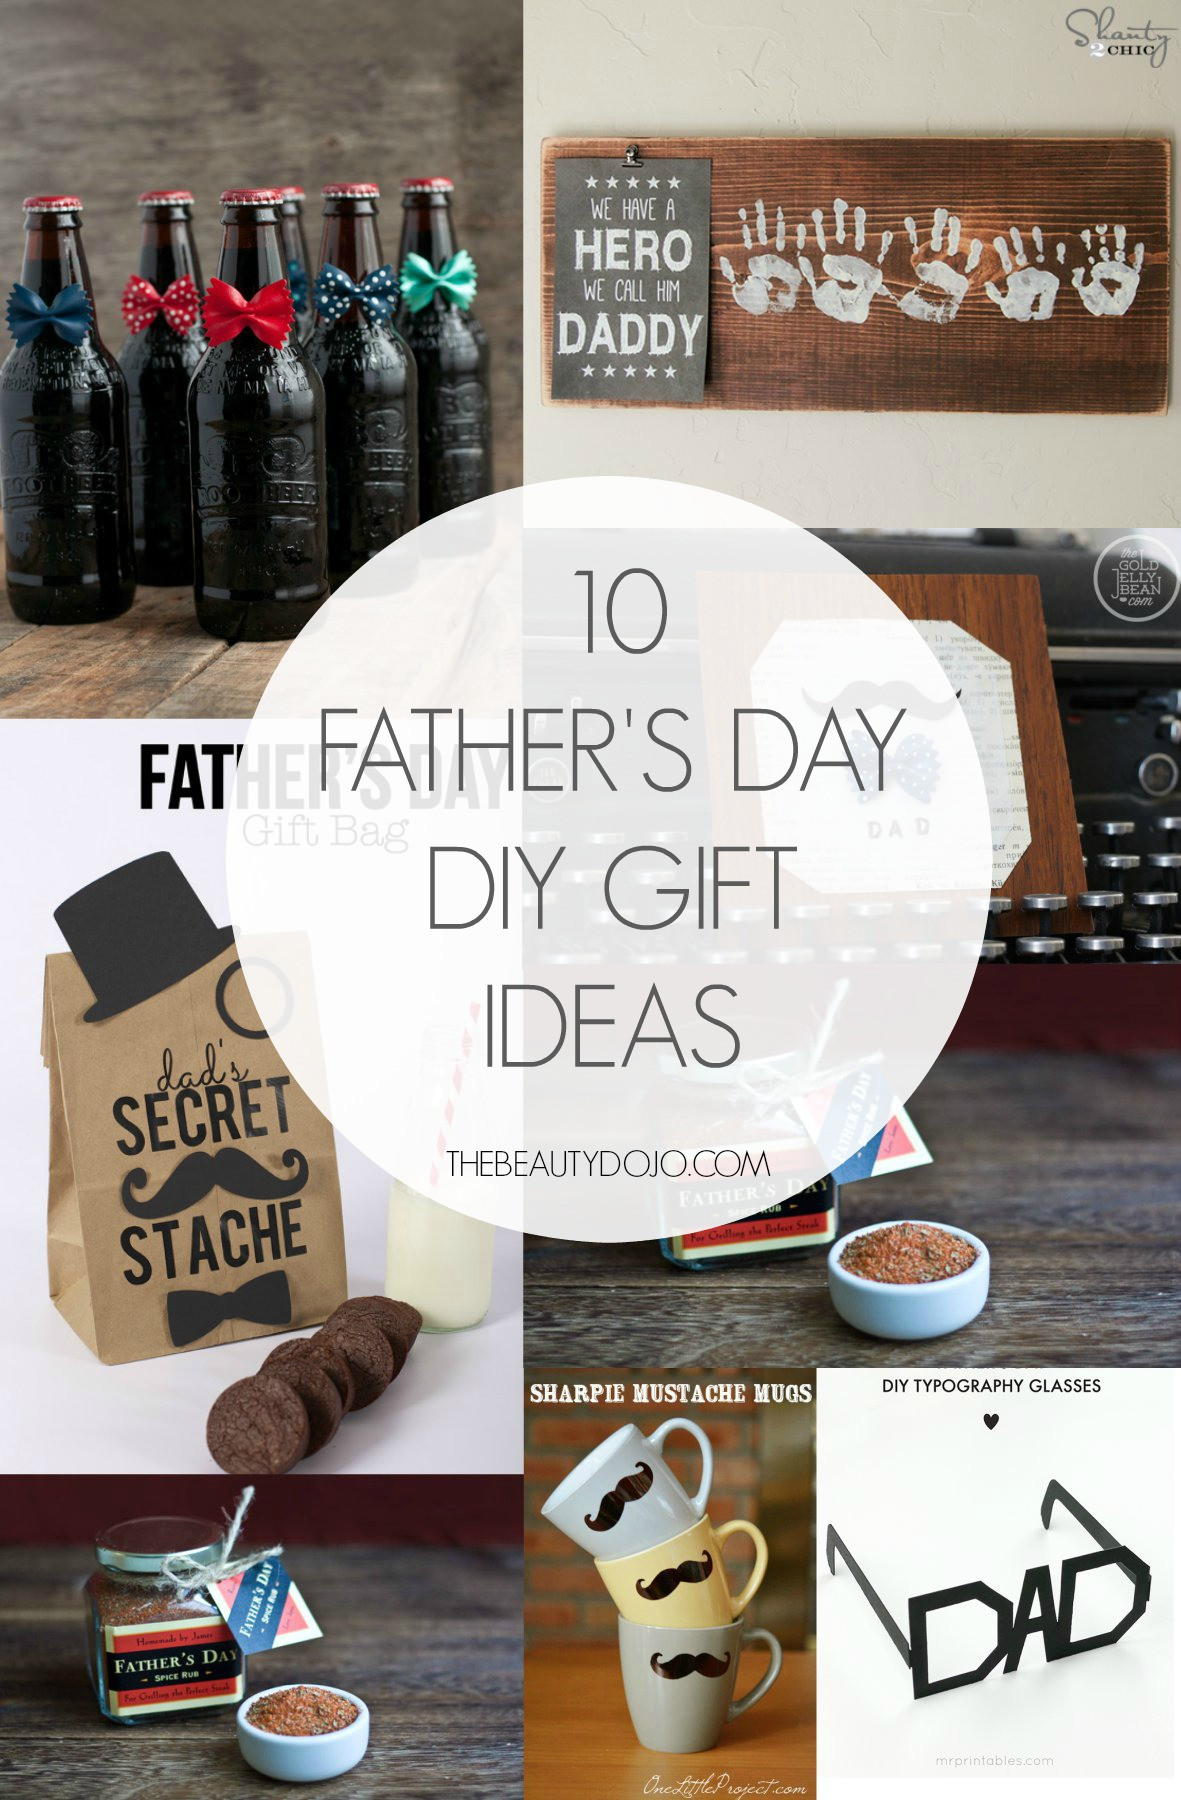 Fathers Day Gifts Diy
 10 Father s Day DIY Gift Ideas The Beautydojo